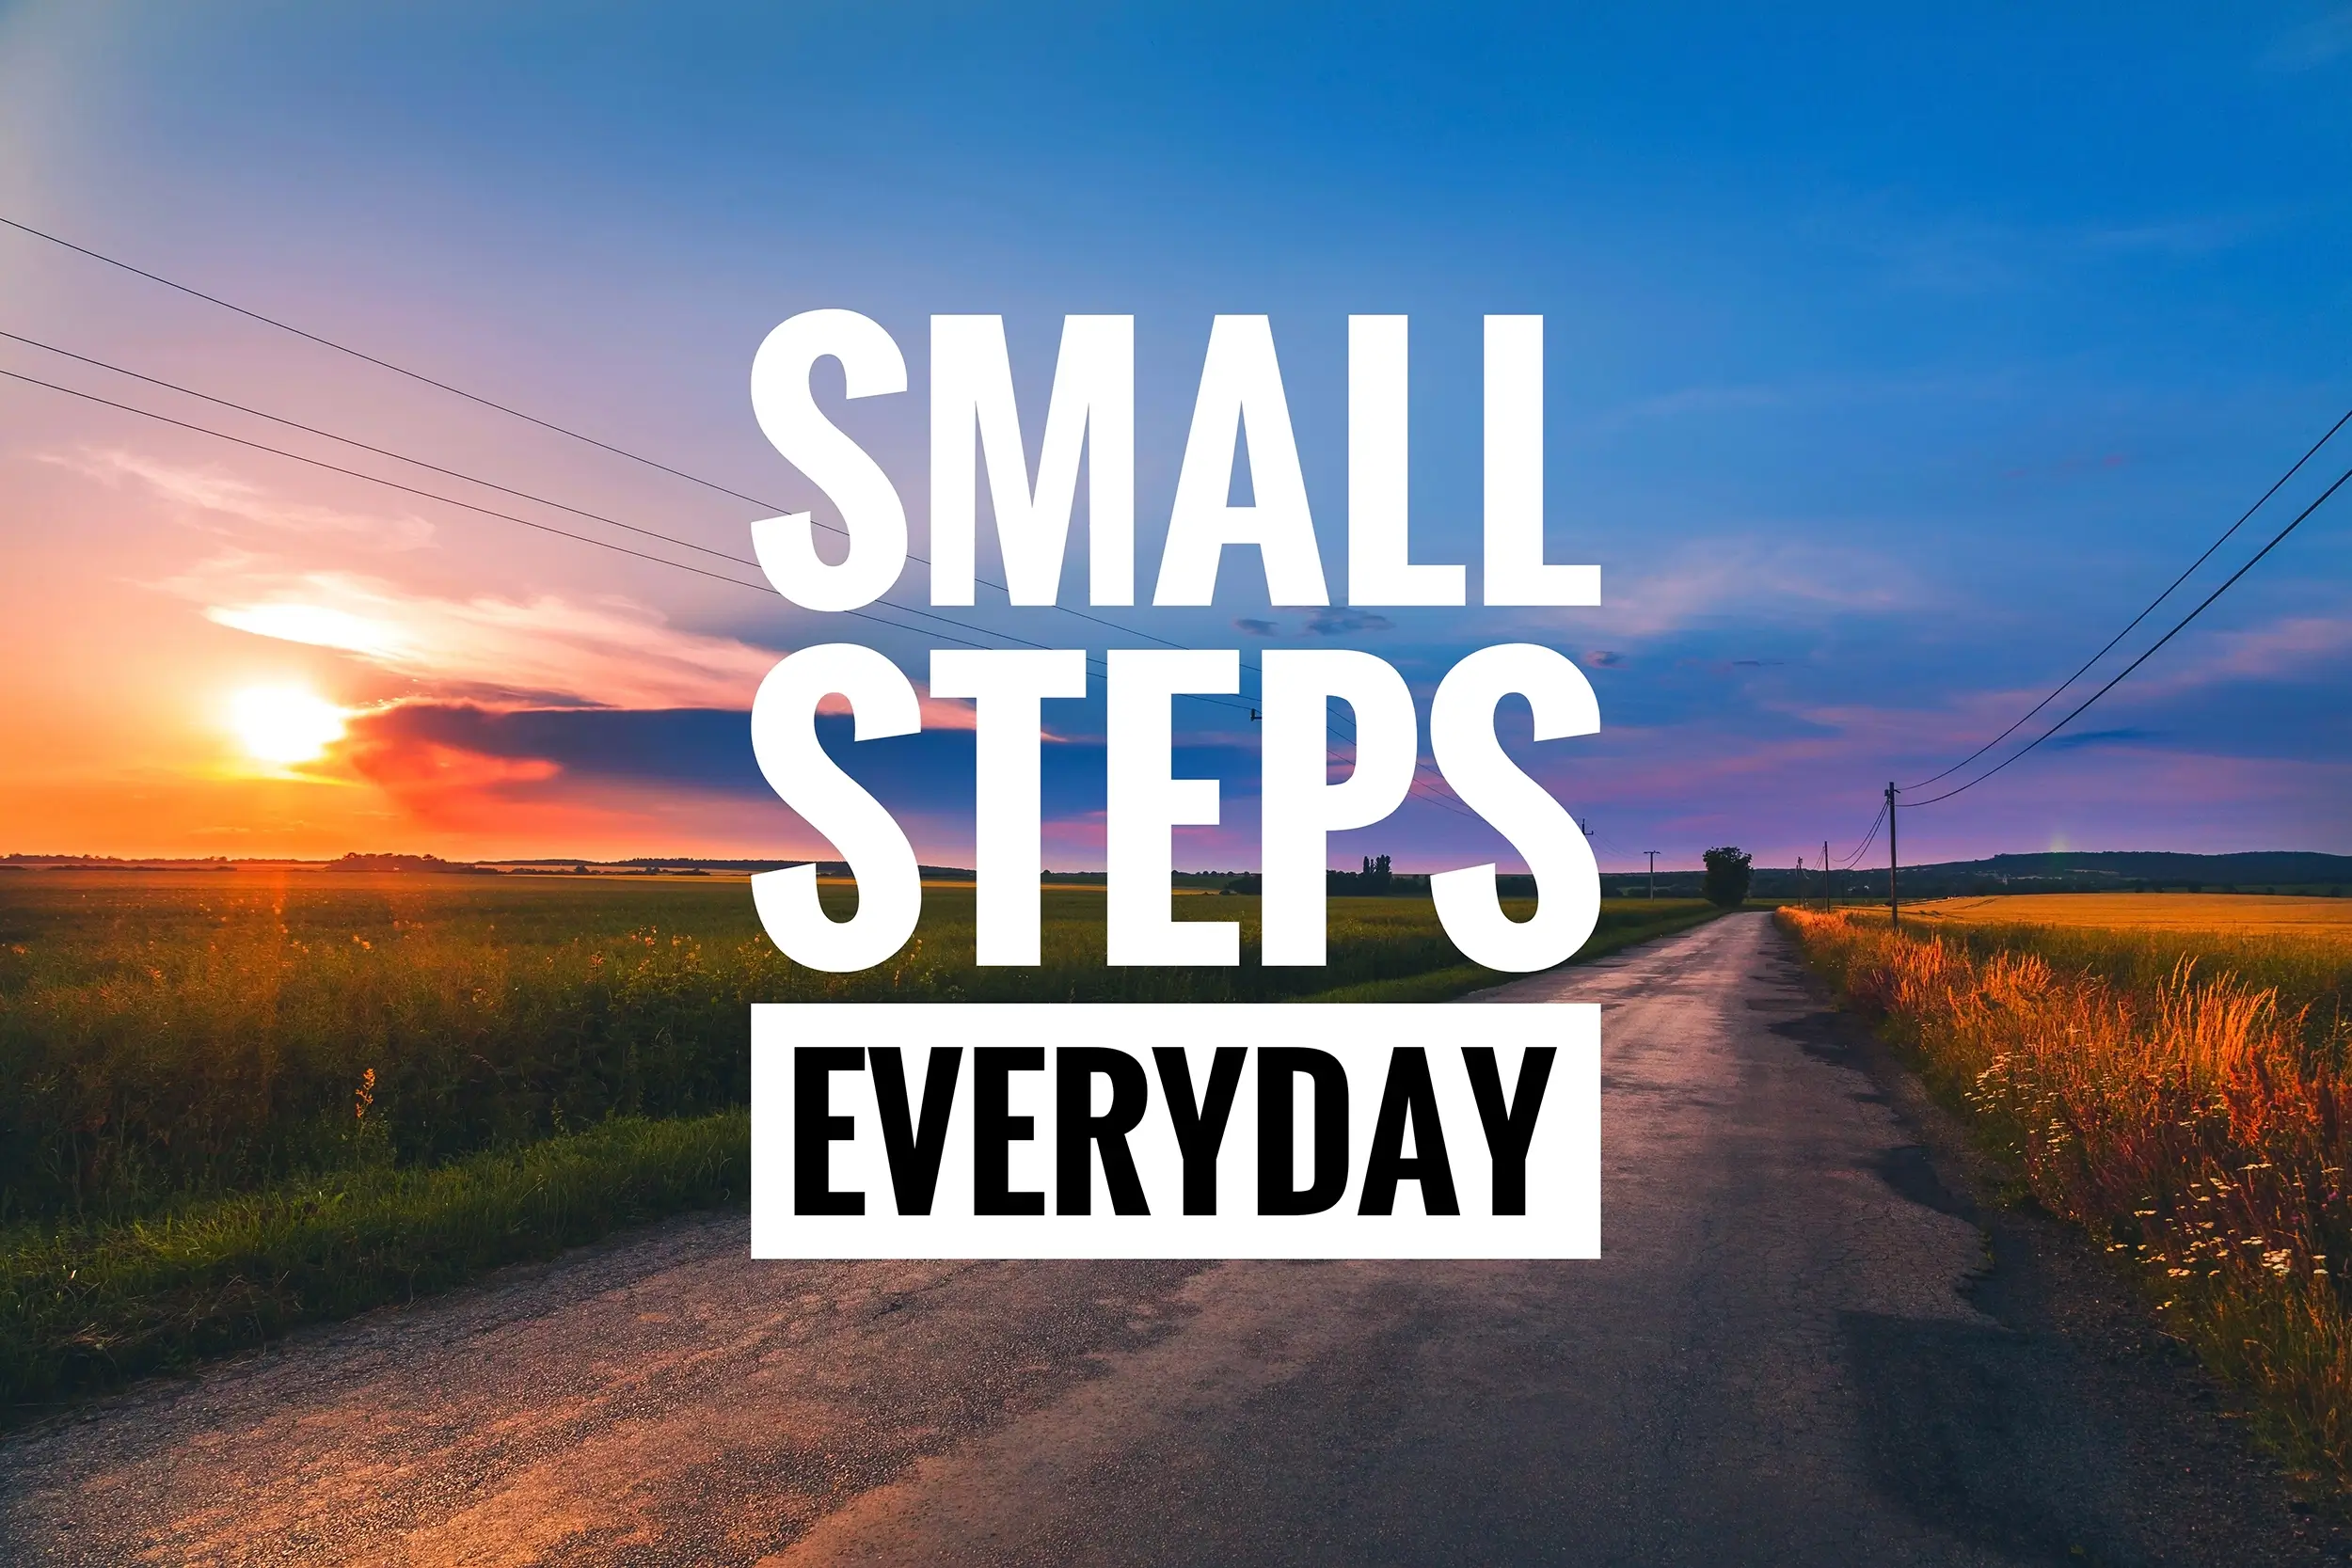 Sunset illuminates a country road, accompanied by the caption Taking Small Steps Every Day. This signifies that each day offers a fresh start, particularly in the journey towards mental wellness, where the initial small steps should involve seeking assistance from organizations like BTC